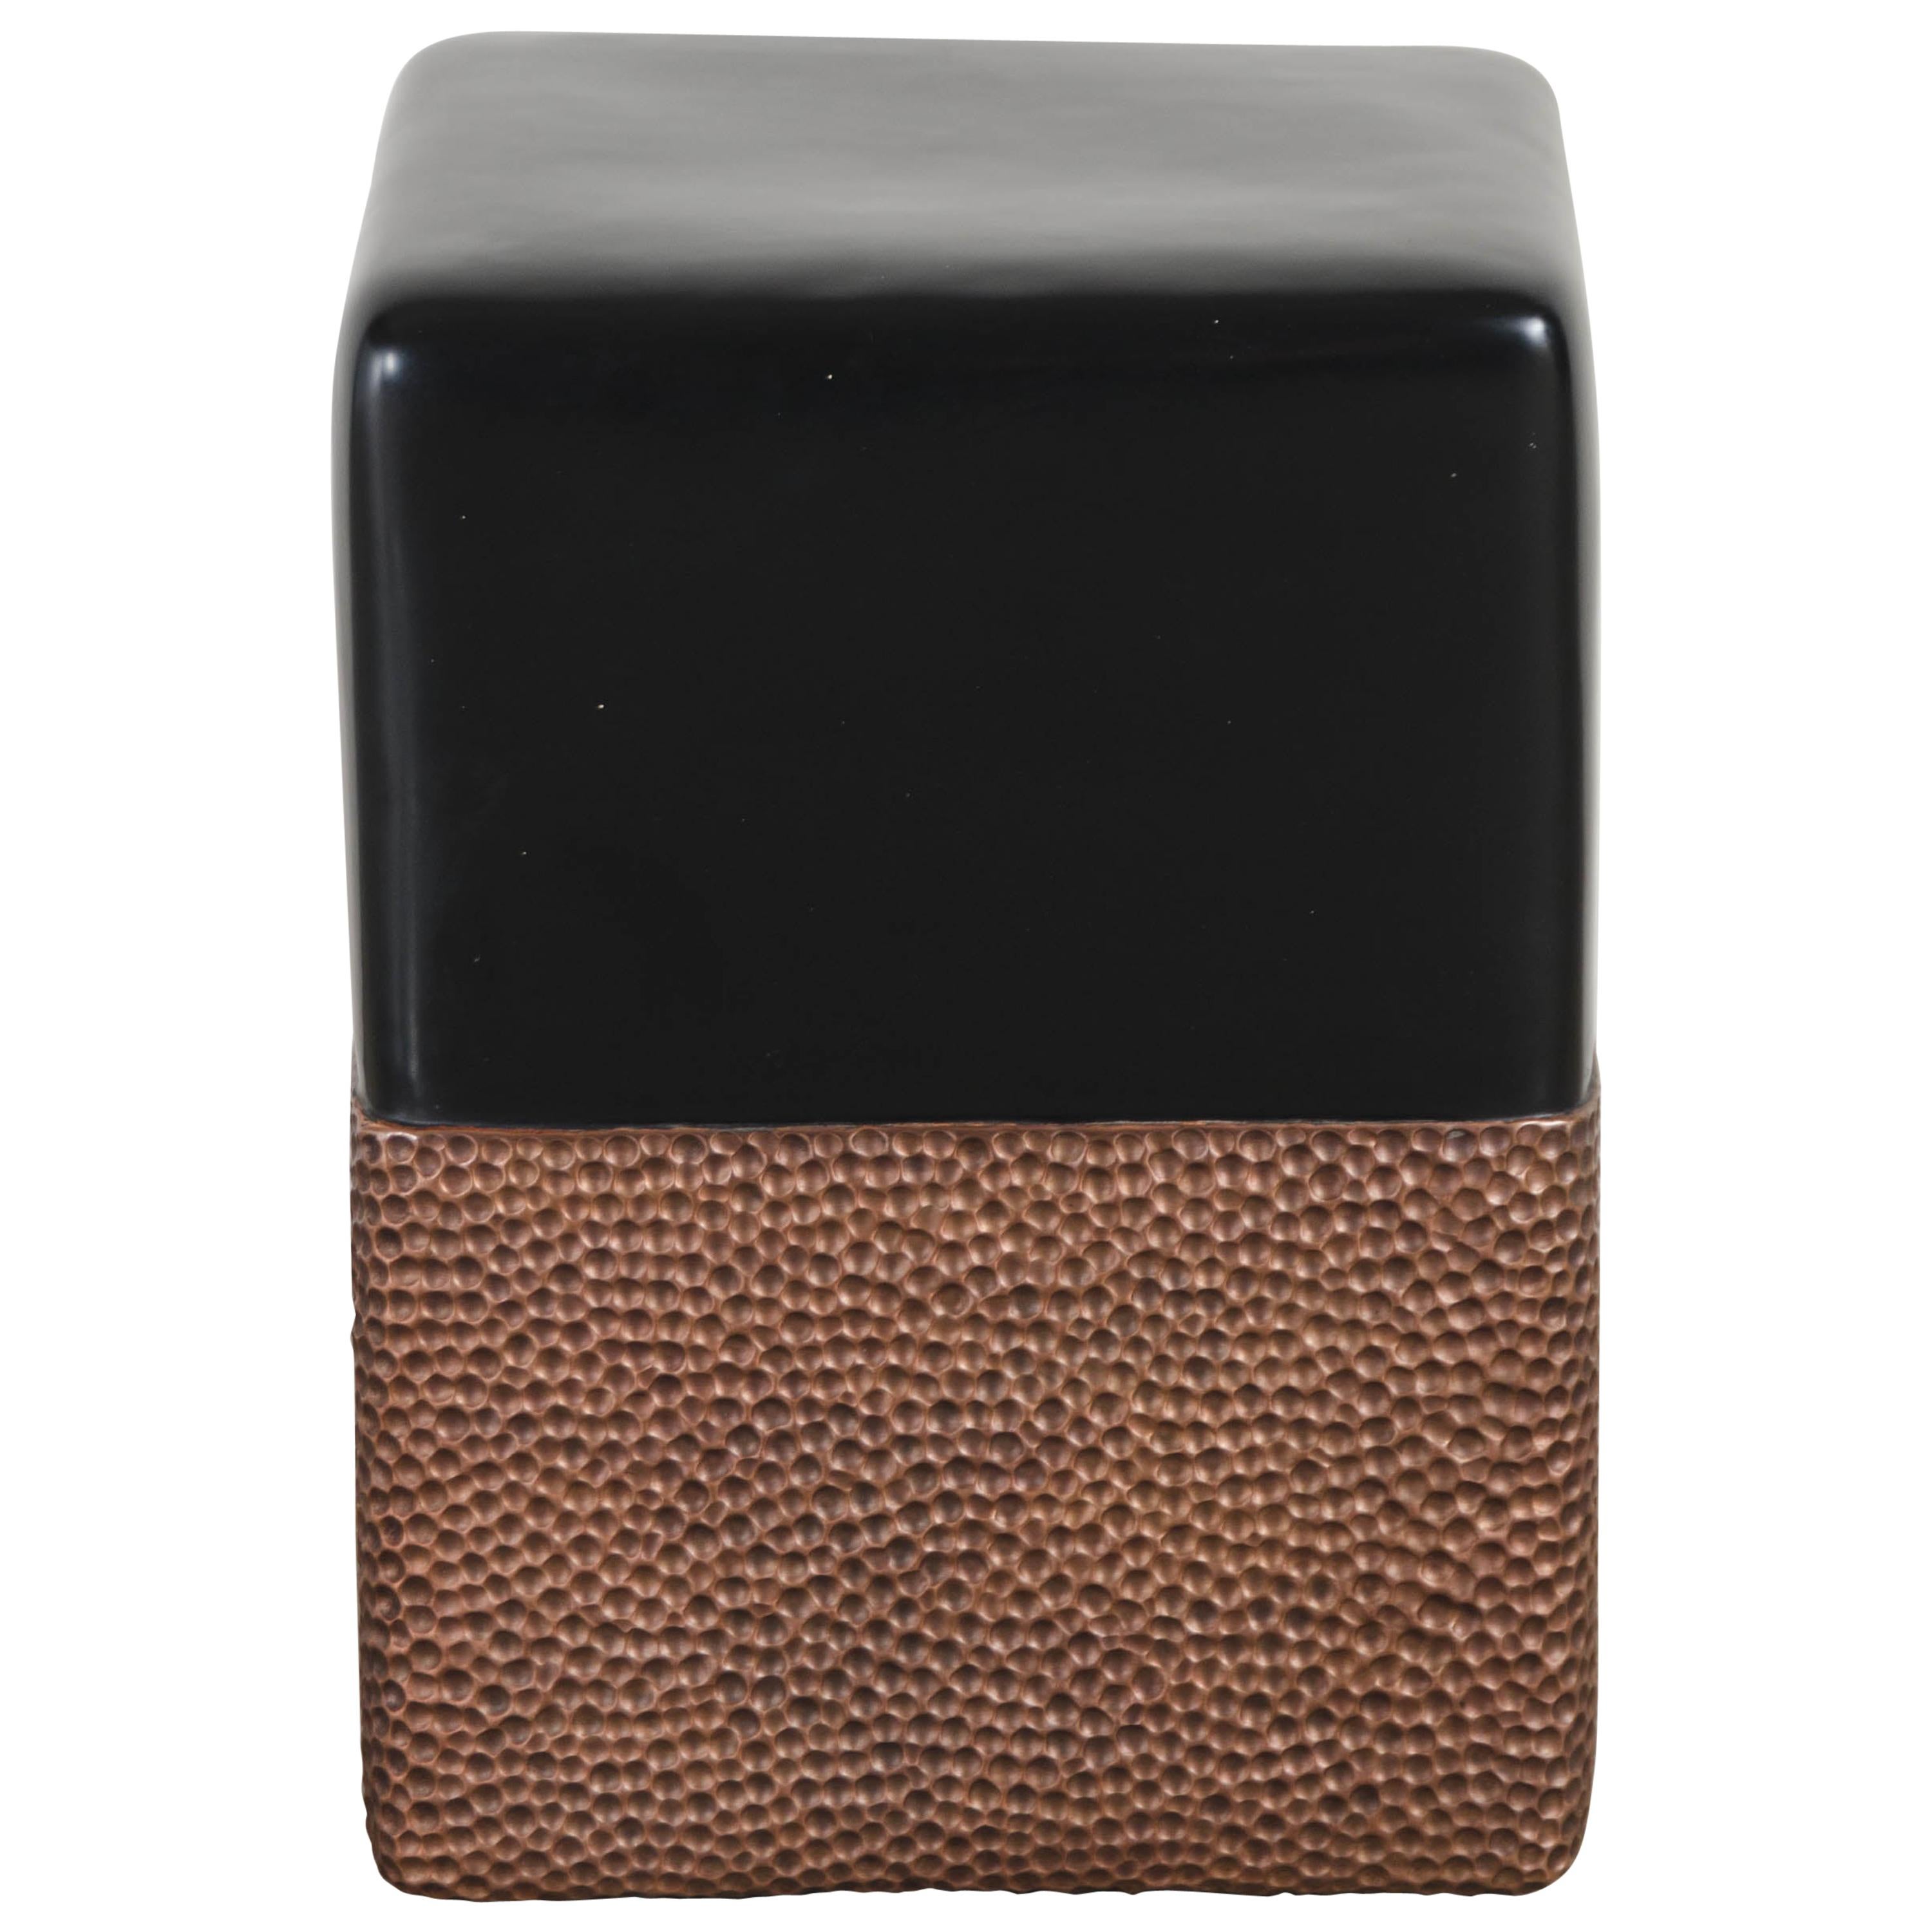 Toad Skin Block Drumstool, Black Lacquer and Antique Copper by Robert Kuo